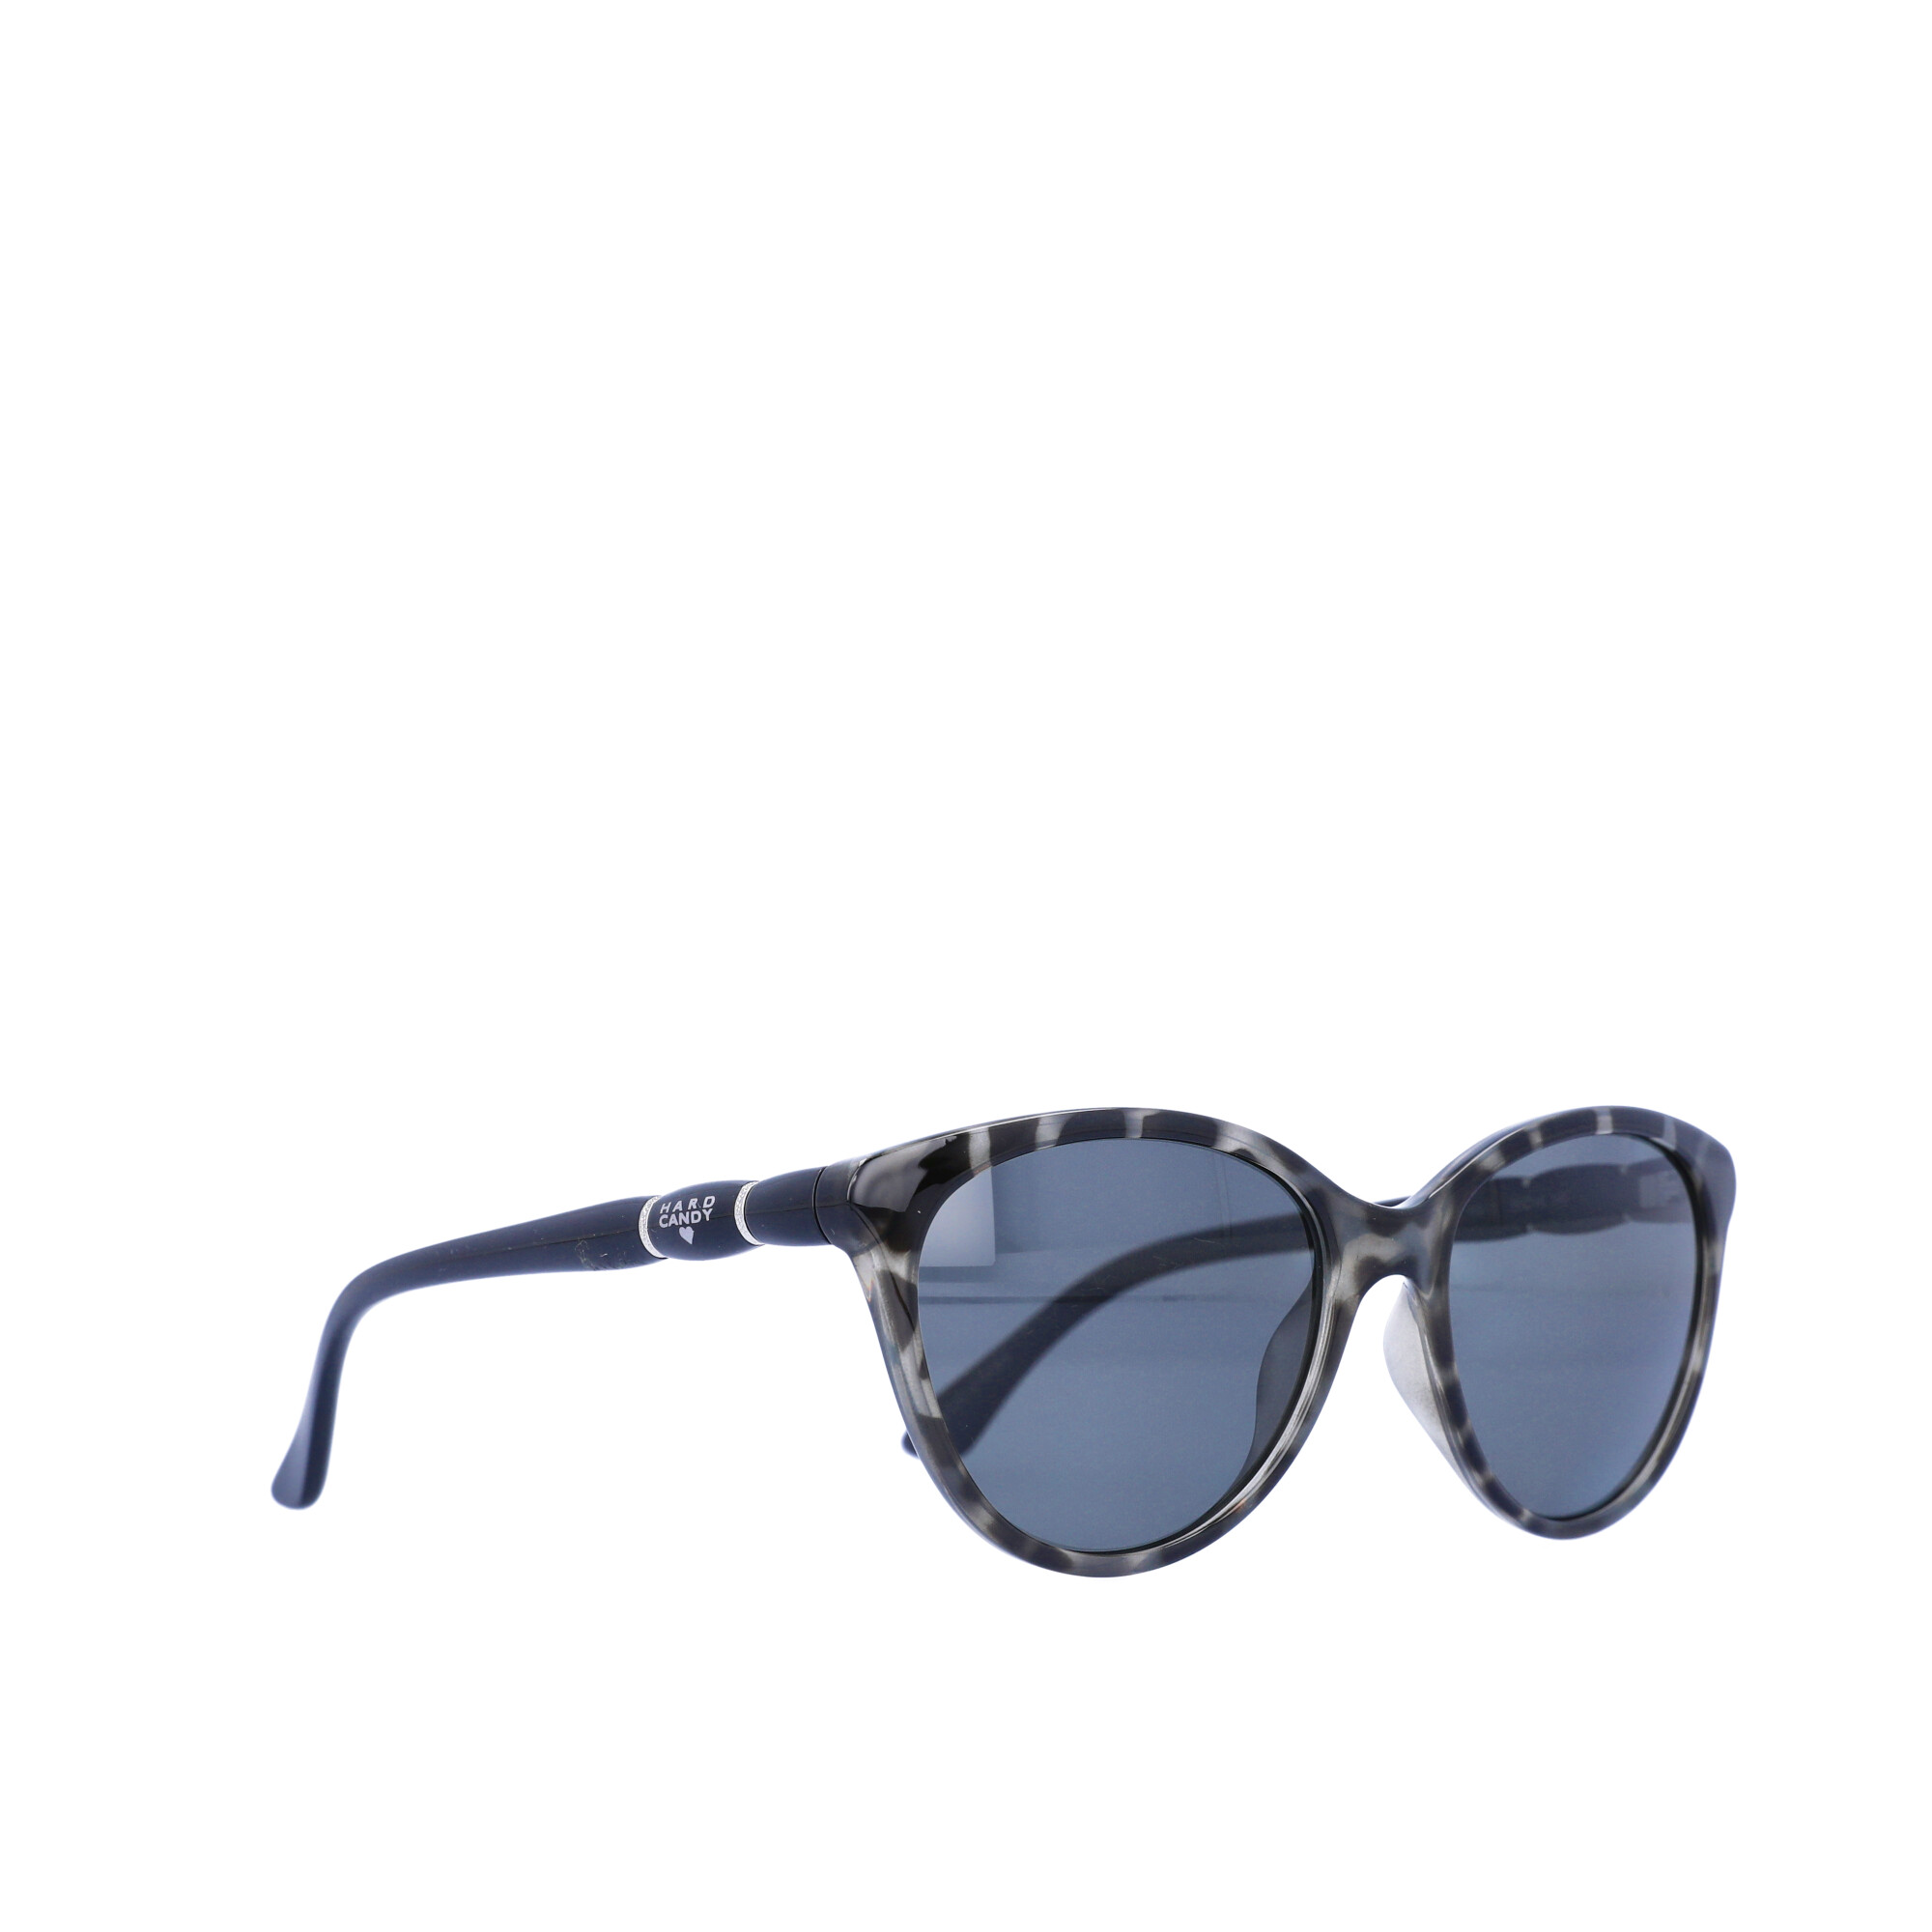 Hard Candy Womens Rx'able Sunglasses, Hs13, Black Tortoise Patterned, 55-18-142, with Case - image 2 of 13